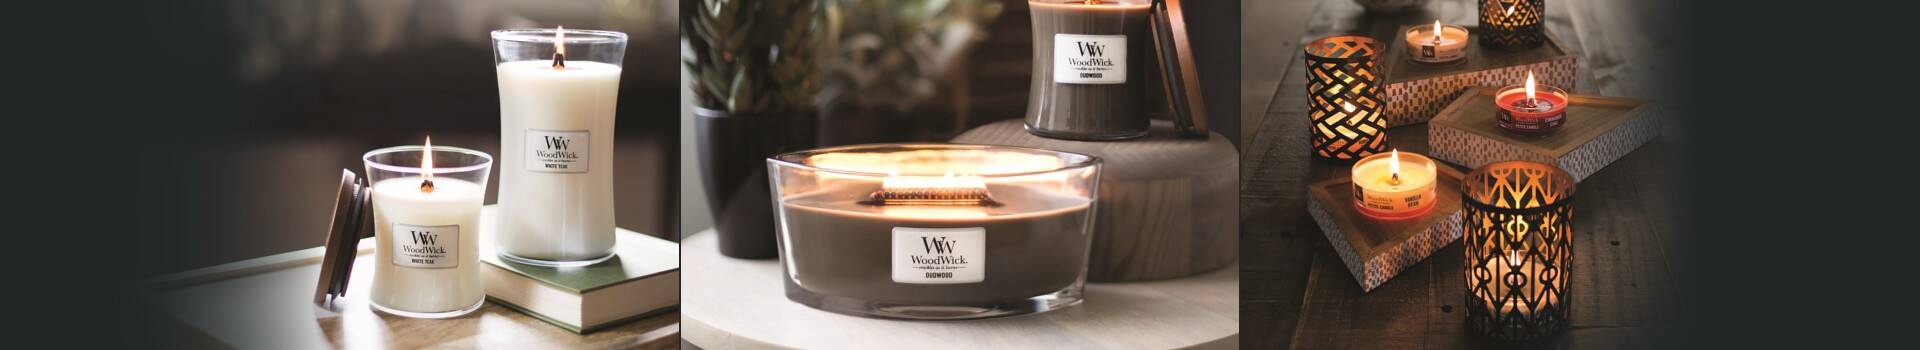 Woodwick Hourglass Candles